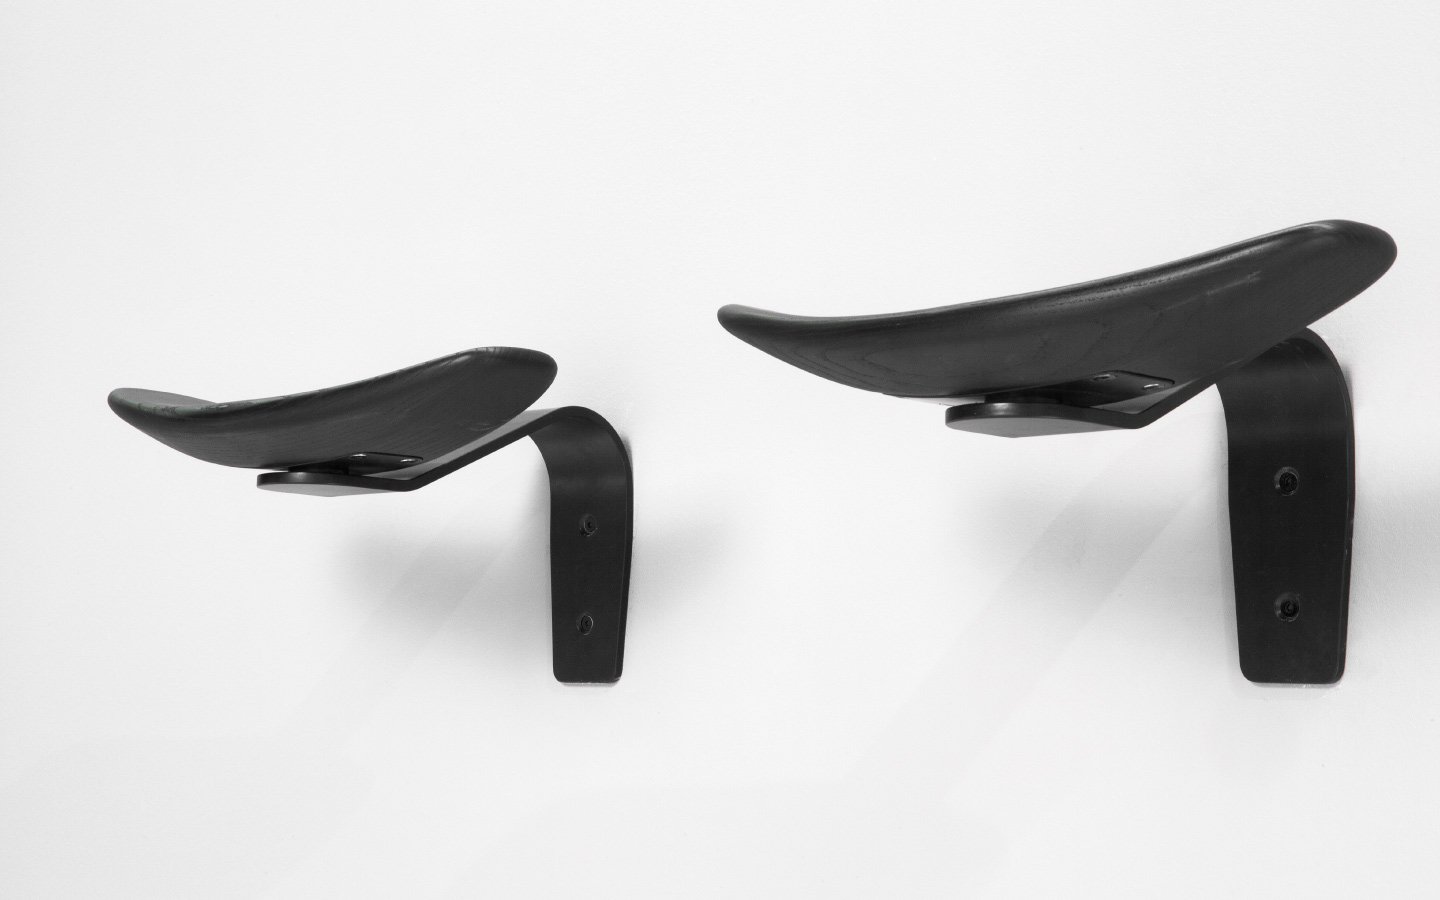 Ryo Chair stool from lapalma, designed by Enzo Berti